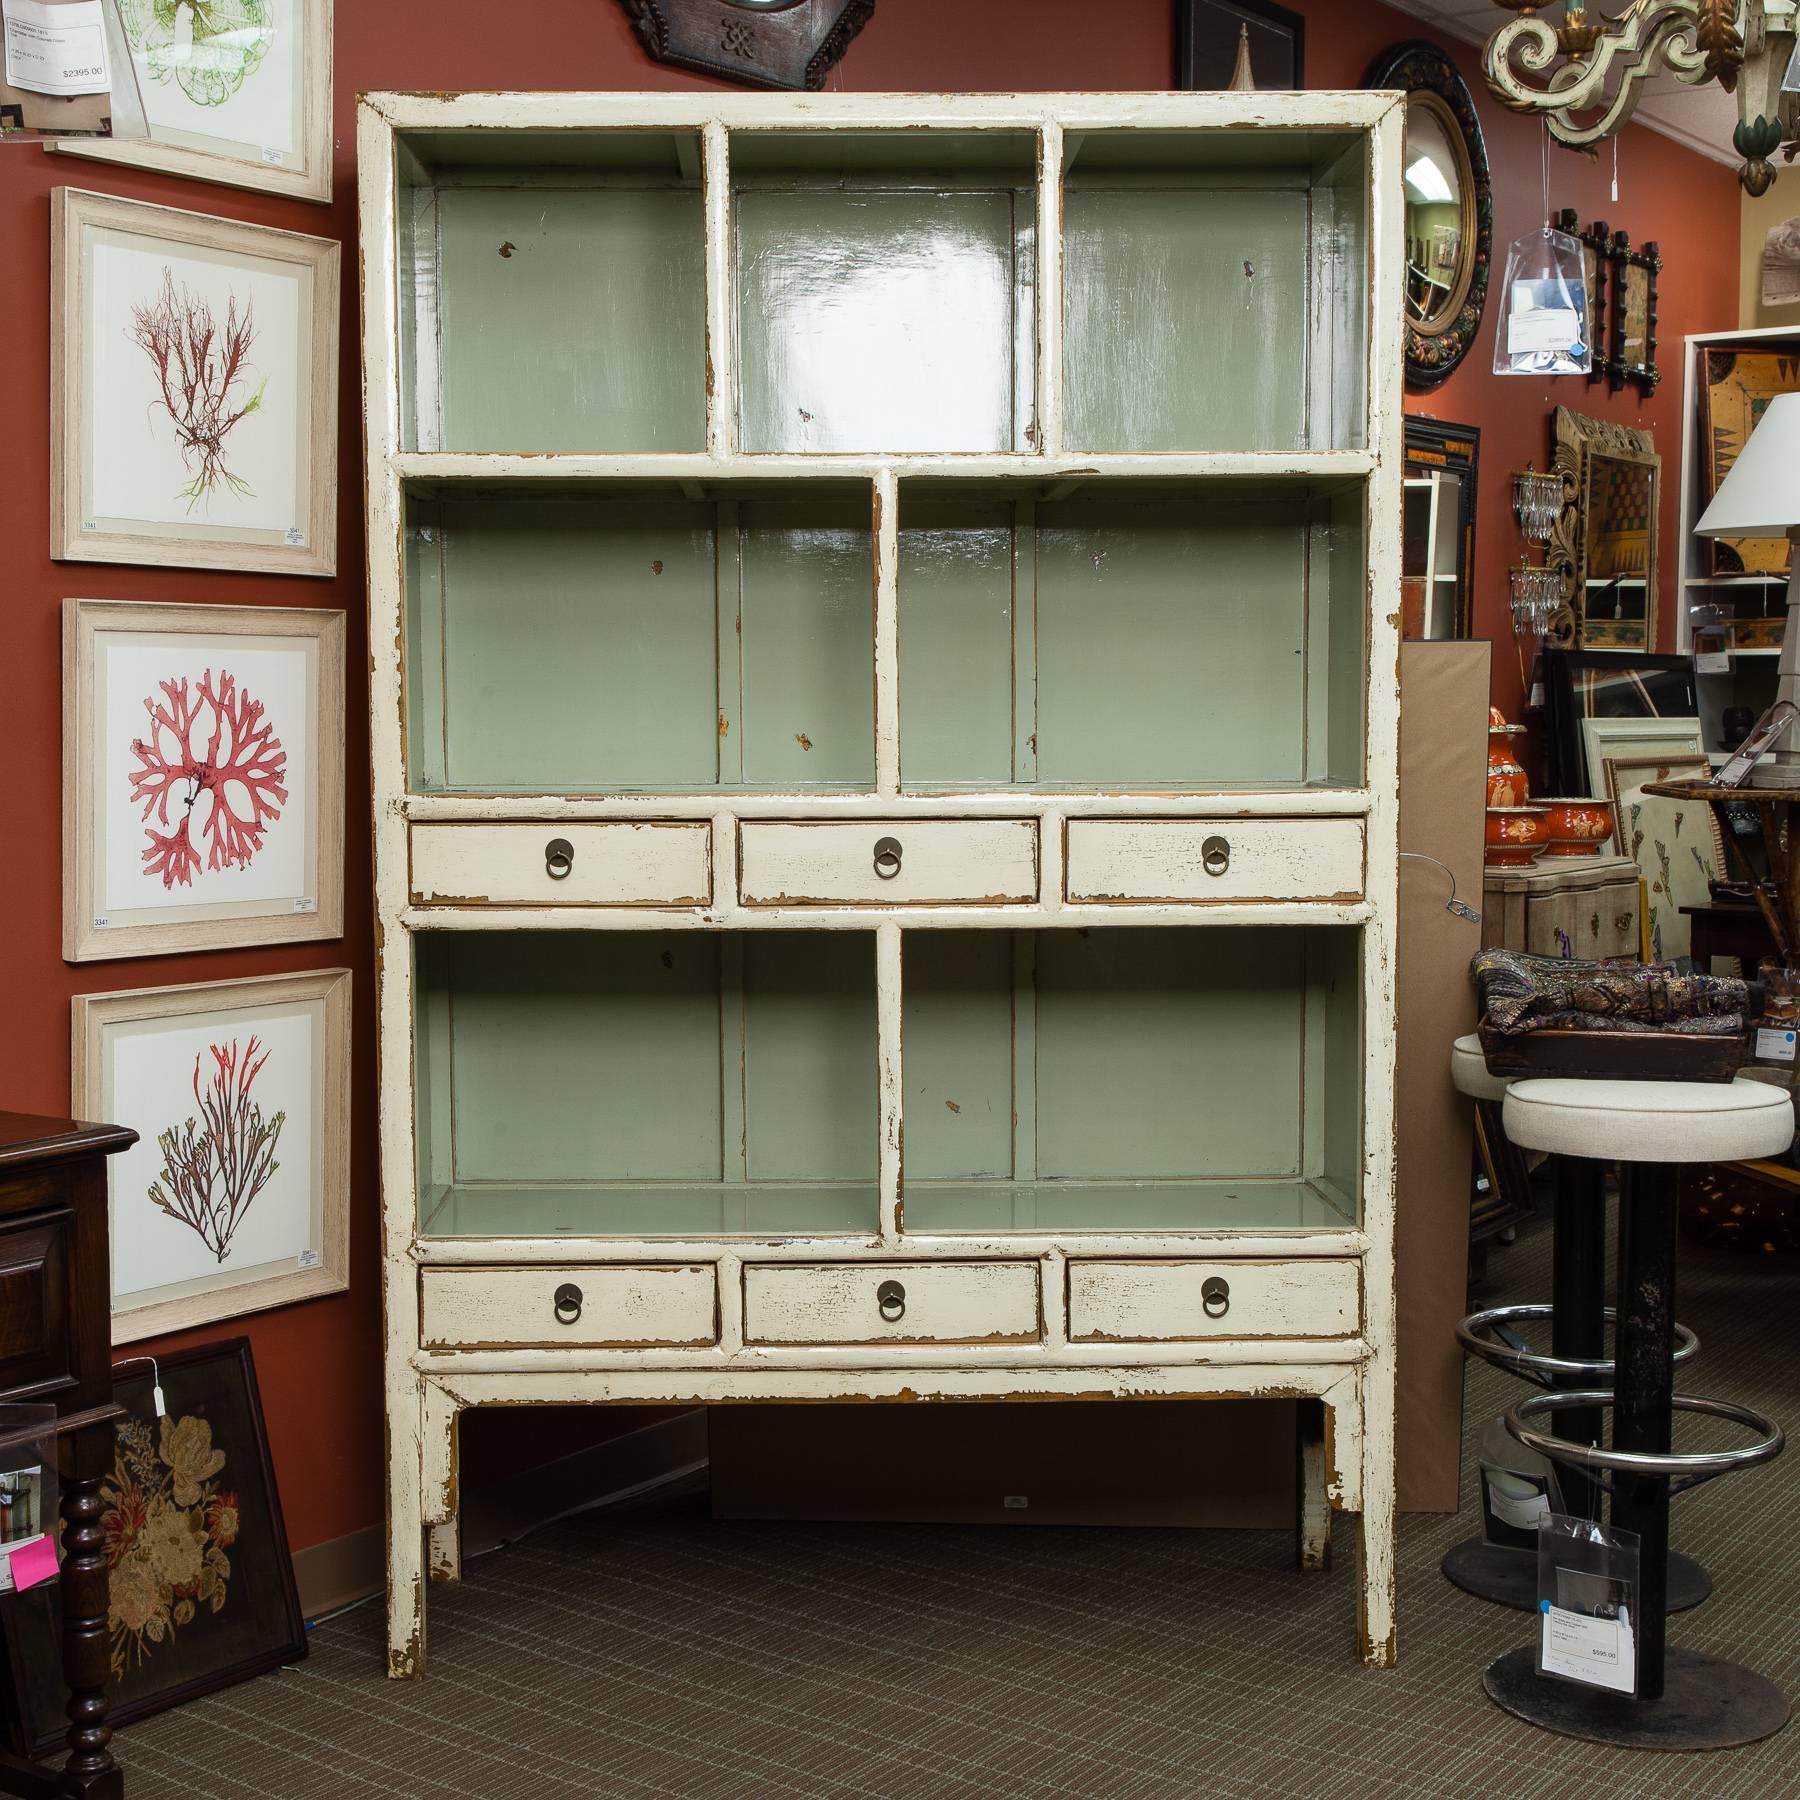 Lacquered Chinese Open Shelf Cabinet with Cream Colored Lacquer Finish